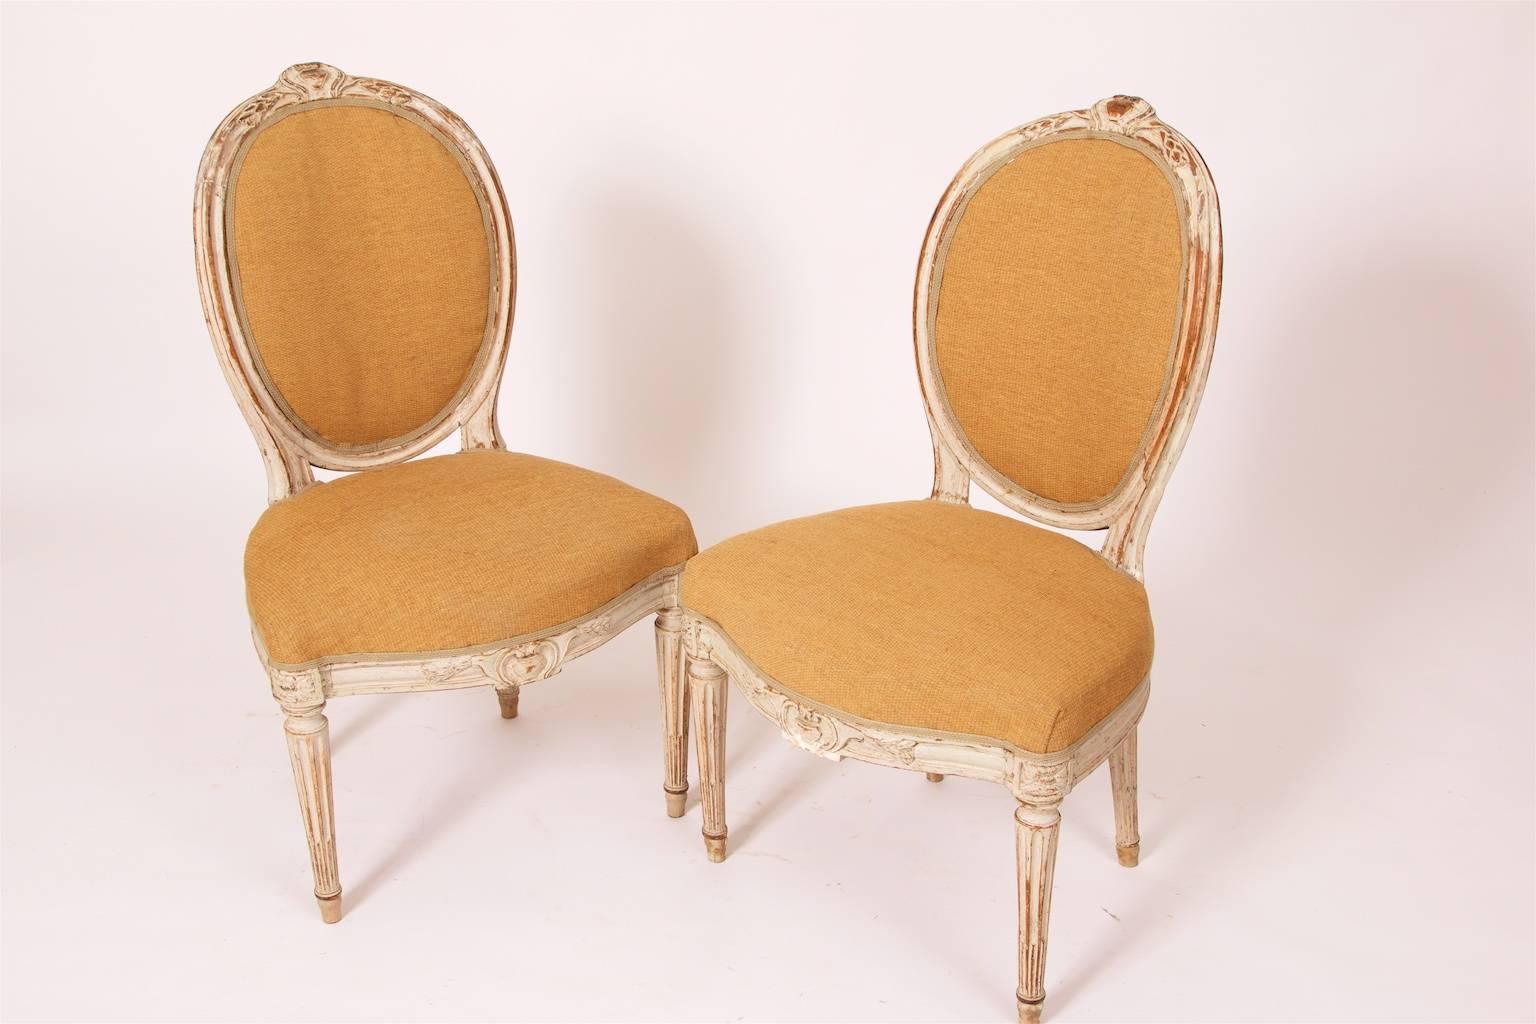 Pair of Georges Jacob Chairs, Paris, France, Louis XVI-Style, Stamped circa 1765 In Good Condition For Sale In Malmo, SE